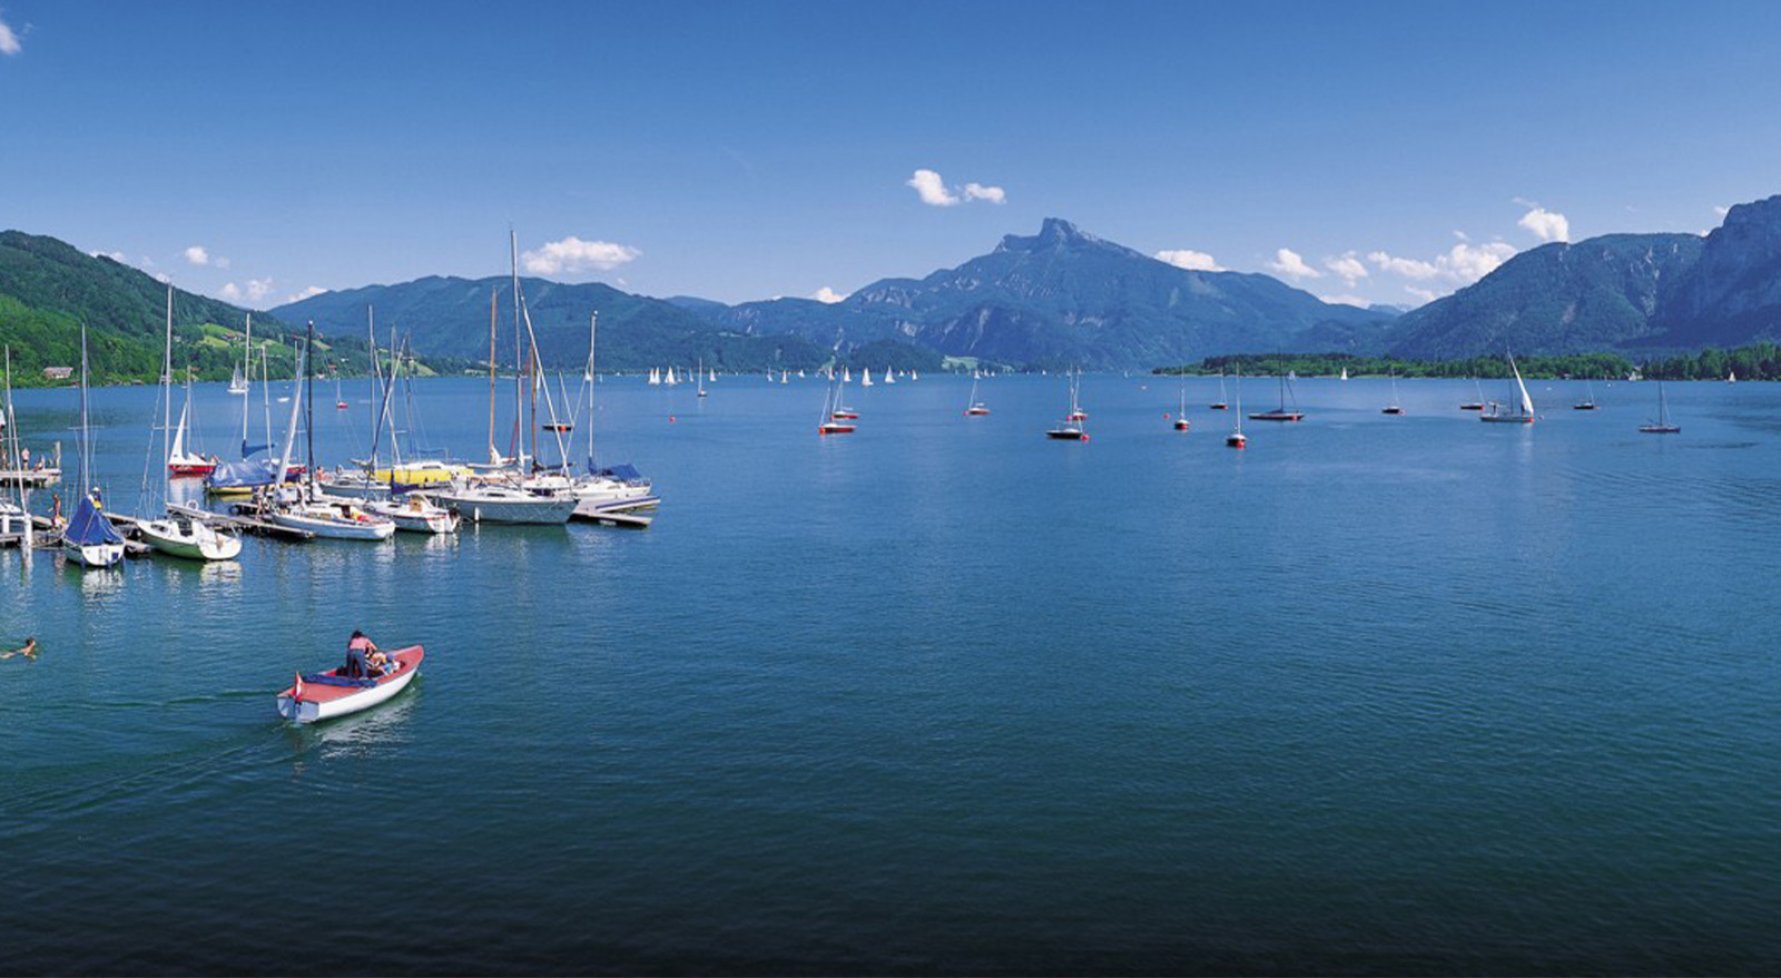 Property in 5310 Mondsee / Salzkammergut: Mediterranean breeze at the lake Mondsee! 3-room apartment with terrace - picture 1